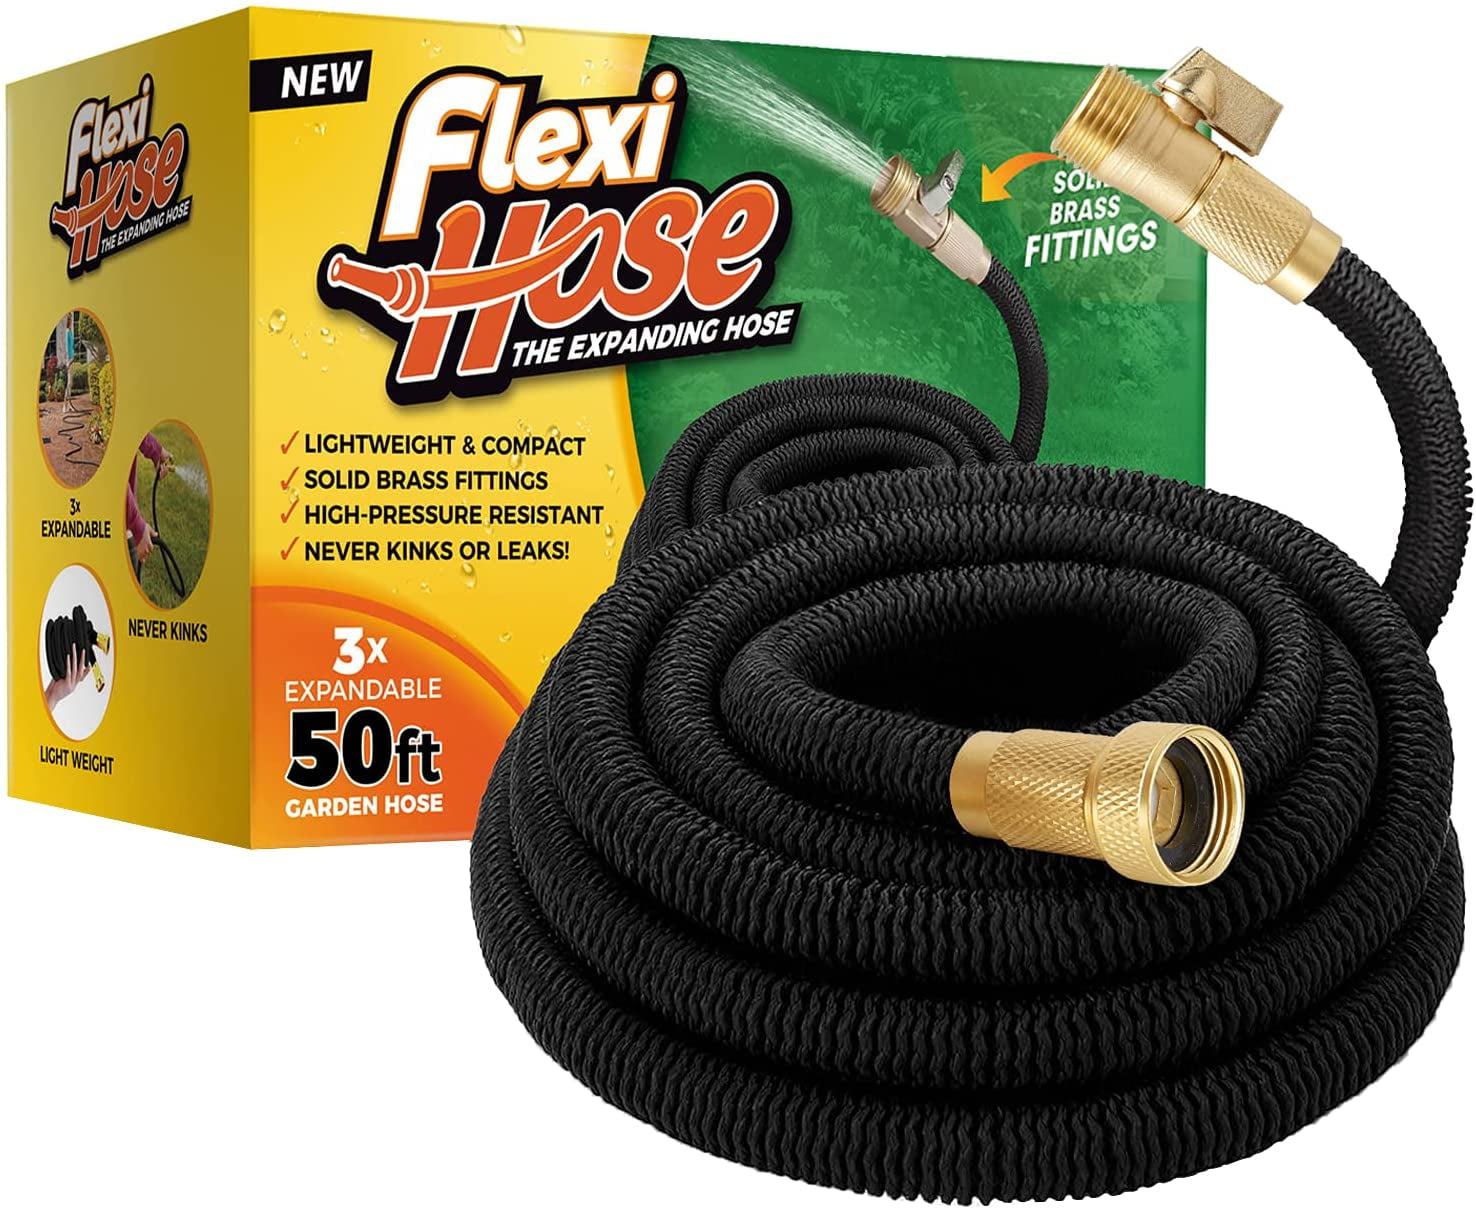 Expanding Solid Brass Metal Fittings Connectors Flexible Strongest Triple Latex Heavy Duty Garden Water Hose for All Watering Needs 25FT Riemex Expandable Hose 25 FT Black New 2019 